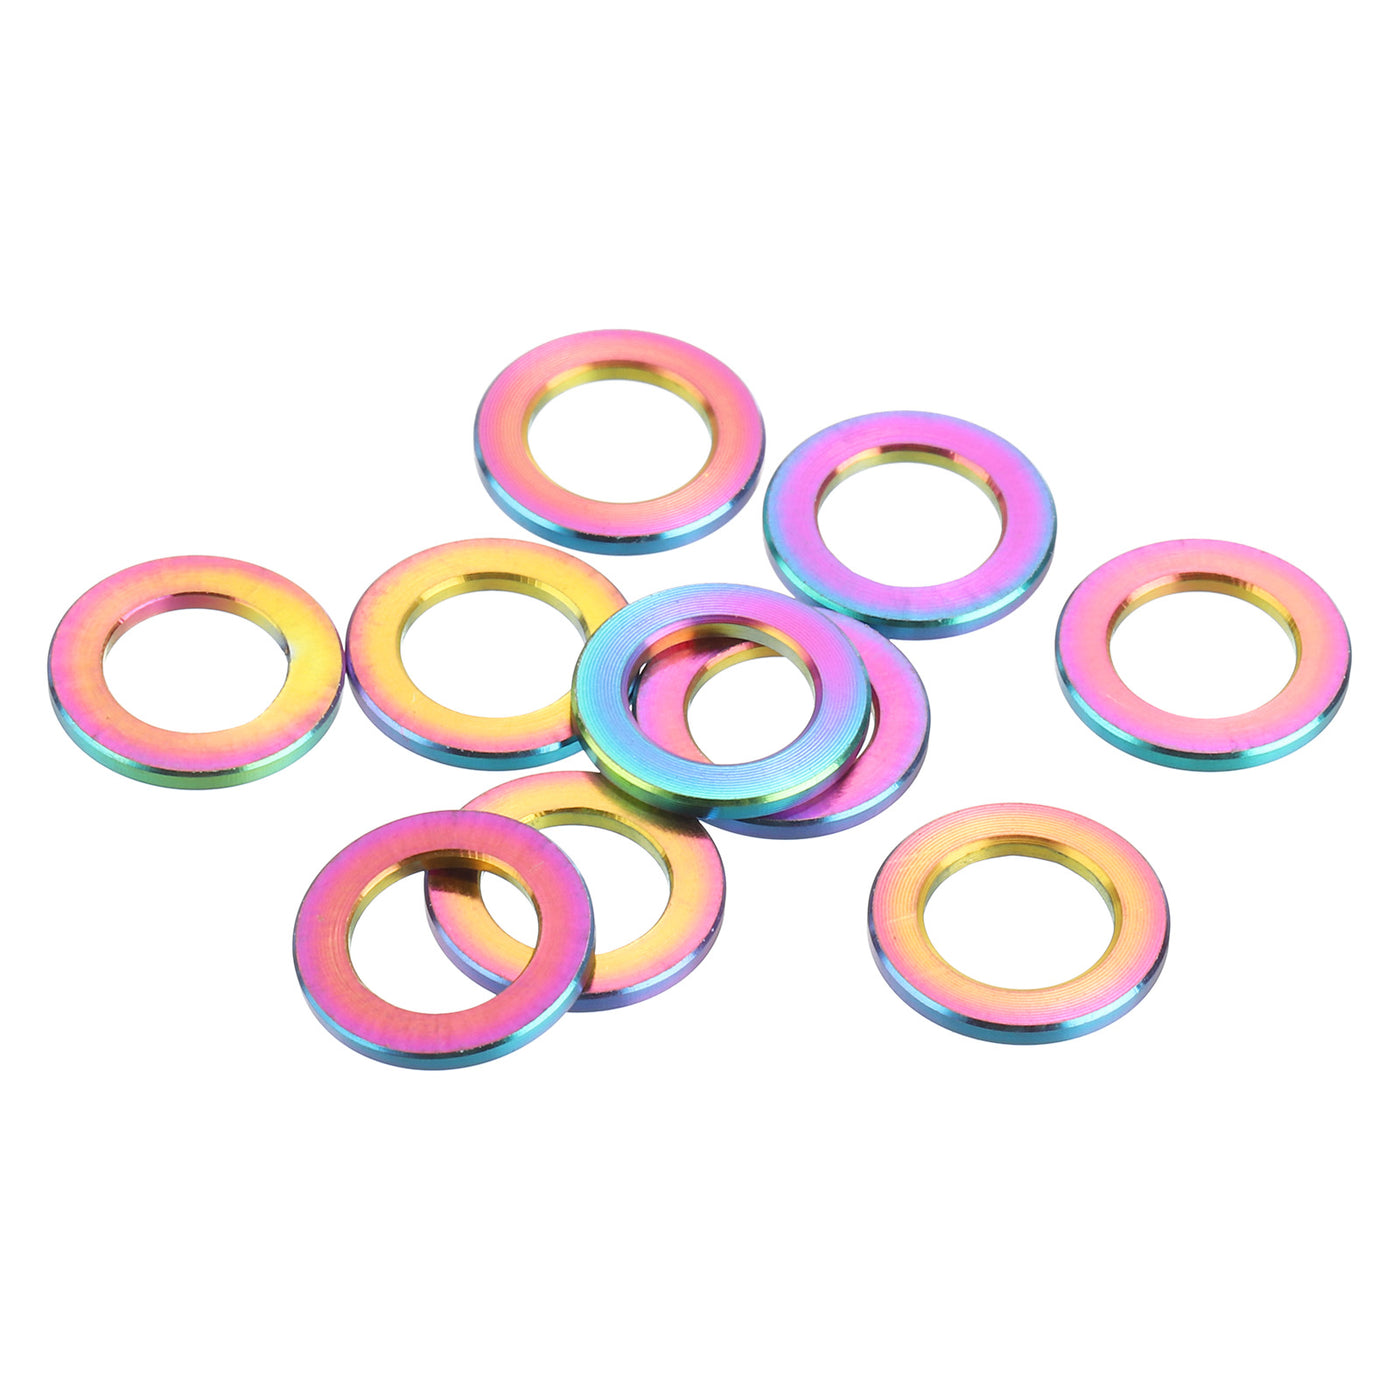 uxcell Uxcell 10 Pcs M6 Titanium Flat Washer Metric Flat Washer Multicolor